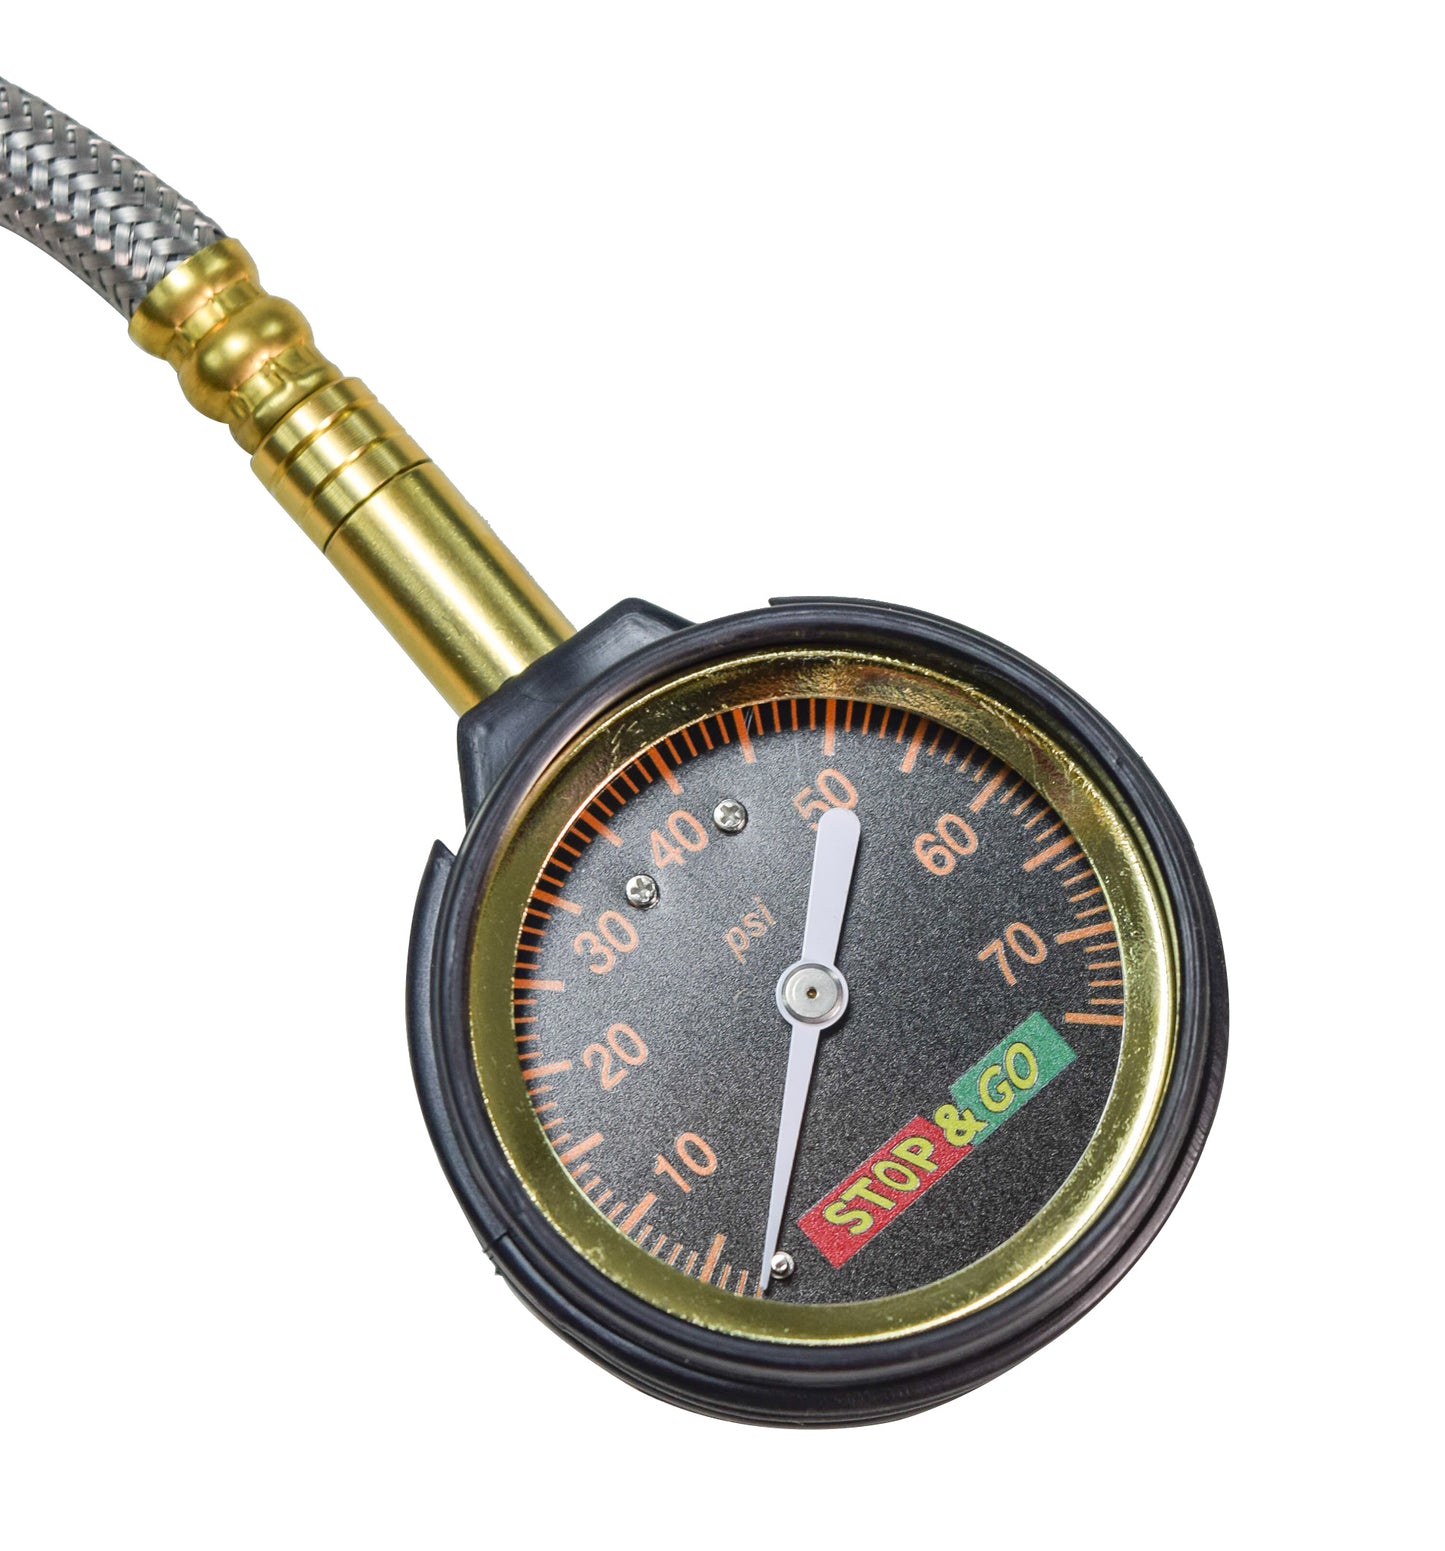 Stop & Go 2010 Off-Road Tire Deflater with Analog Pressure Gauge